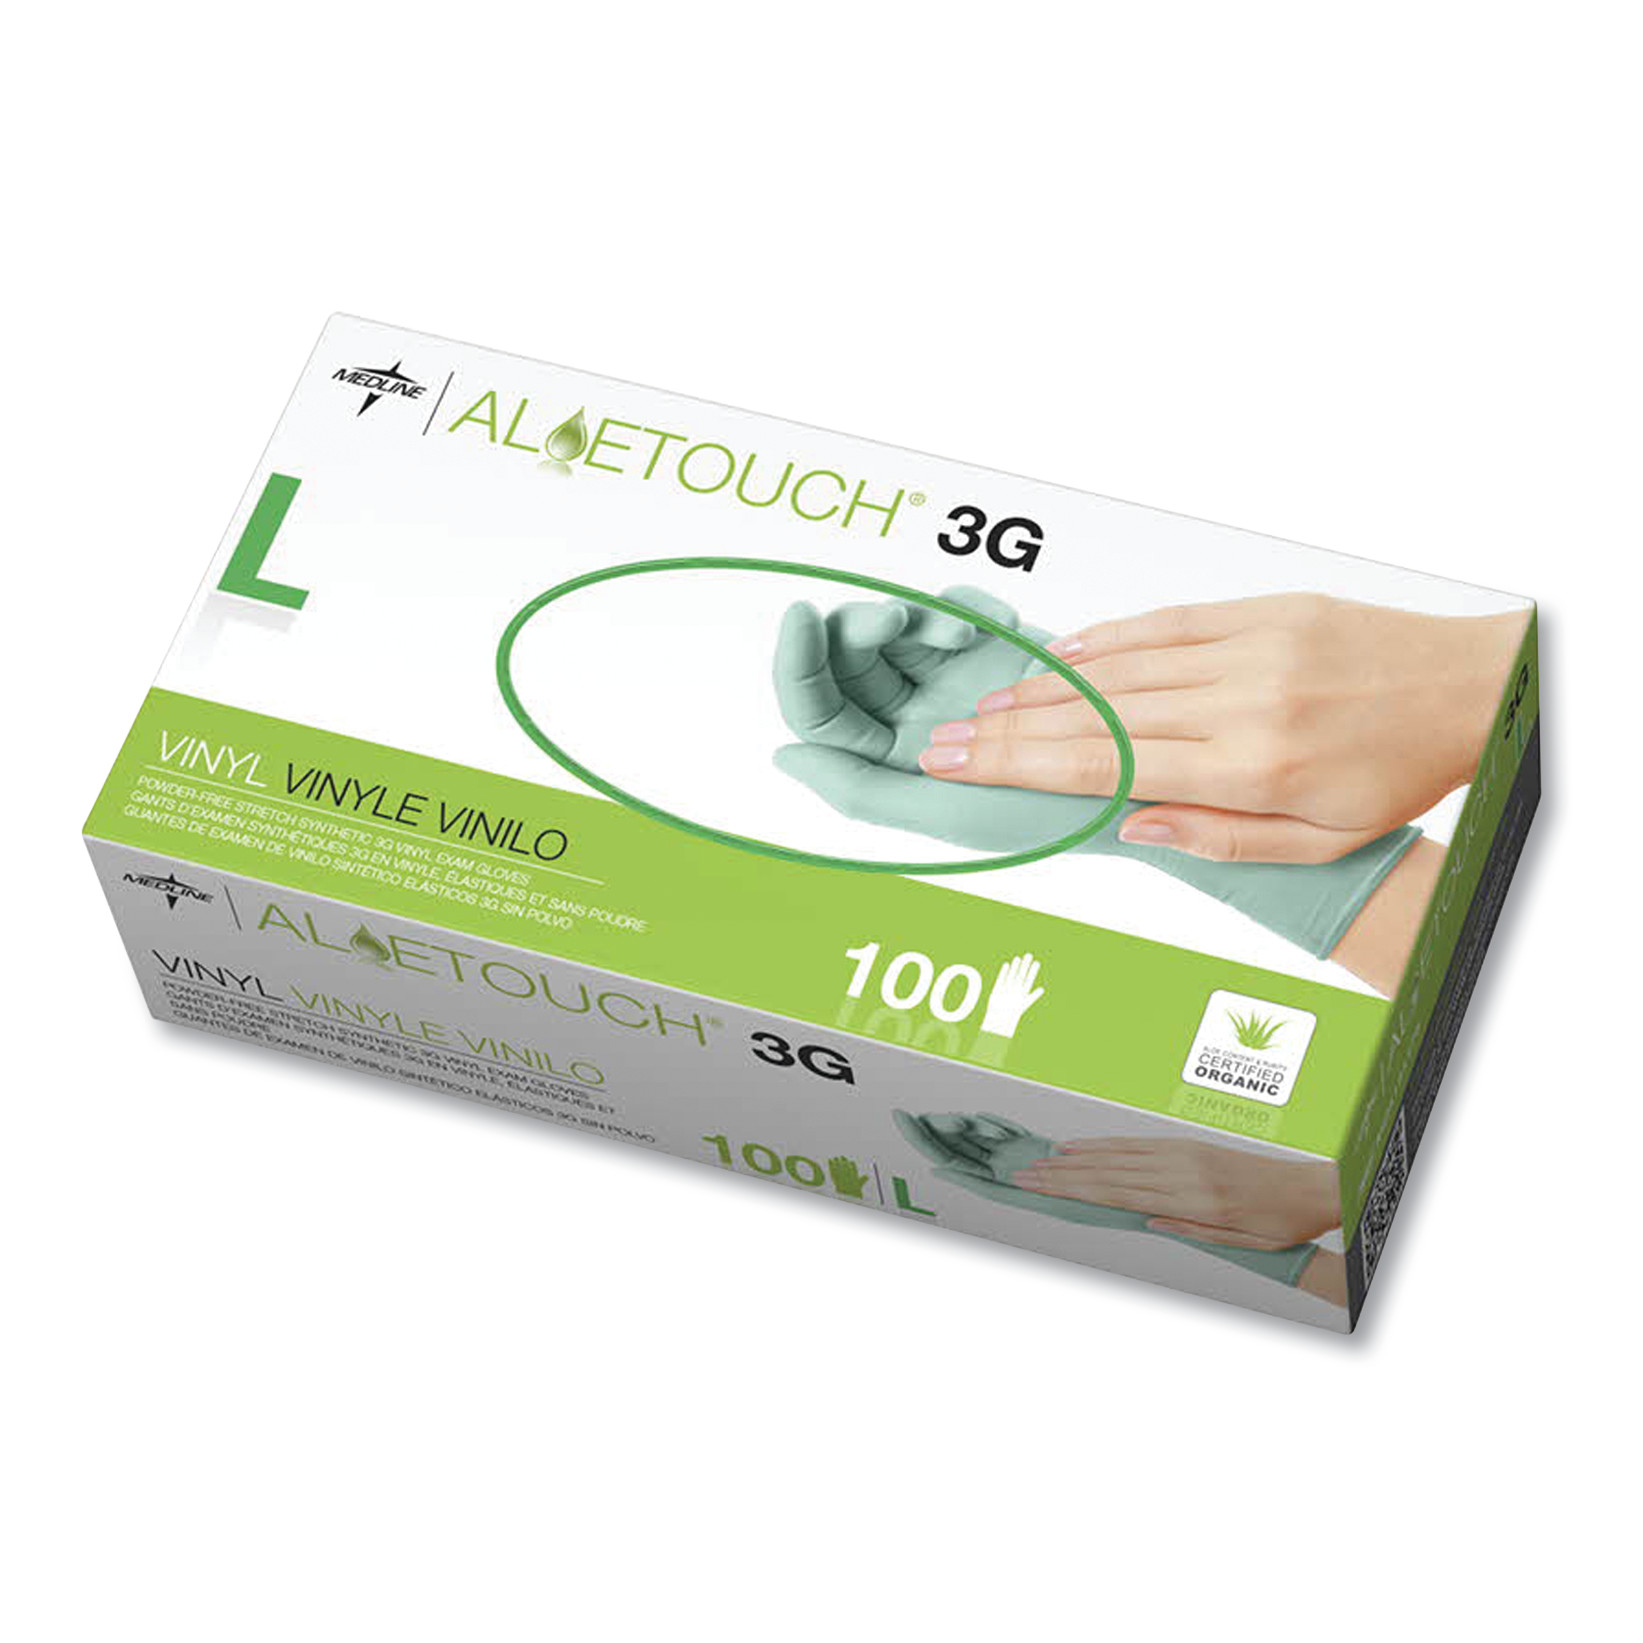  Medline 6MDS195176 Aloetouch 3G Synthetic Exam Gloves - CA Only, Green, Large, 100/Box (MII6MDS195176) 